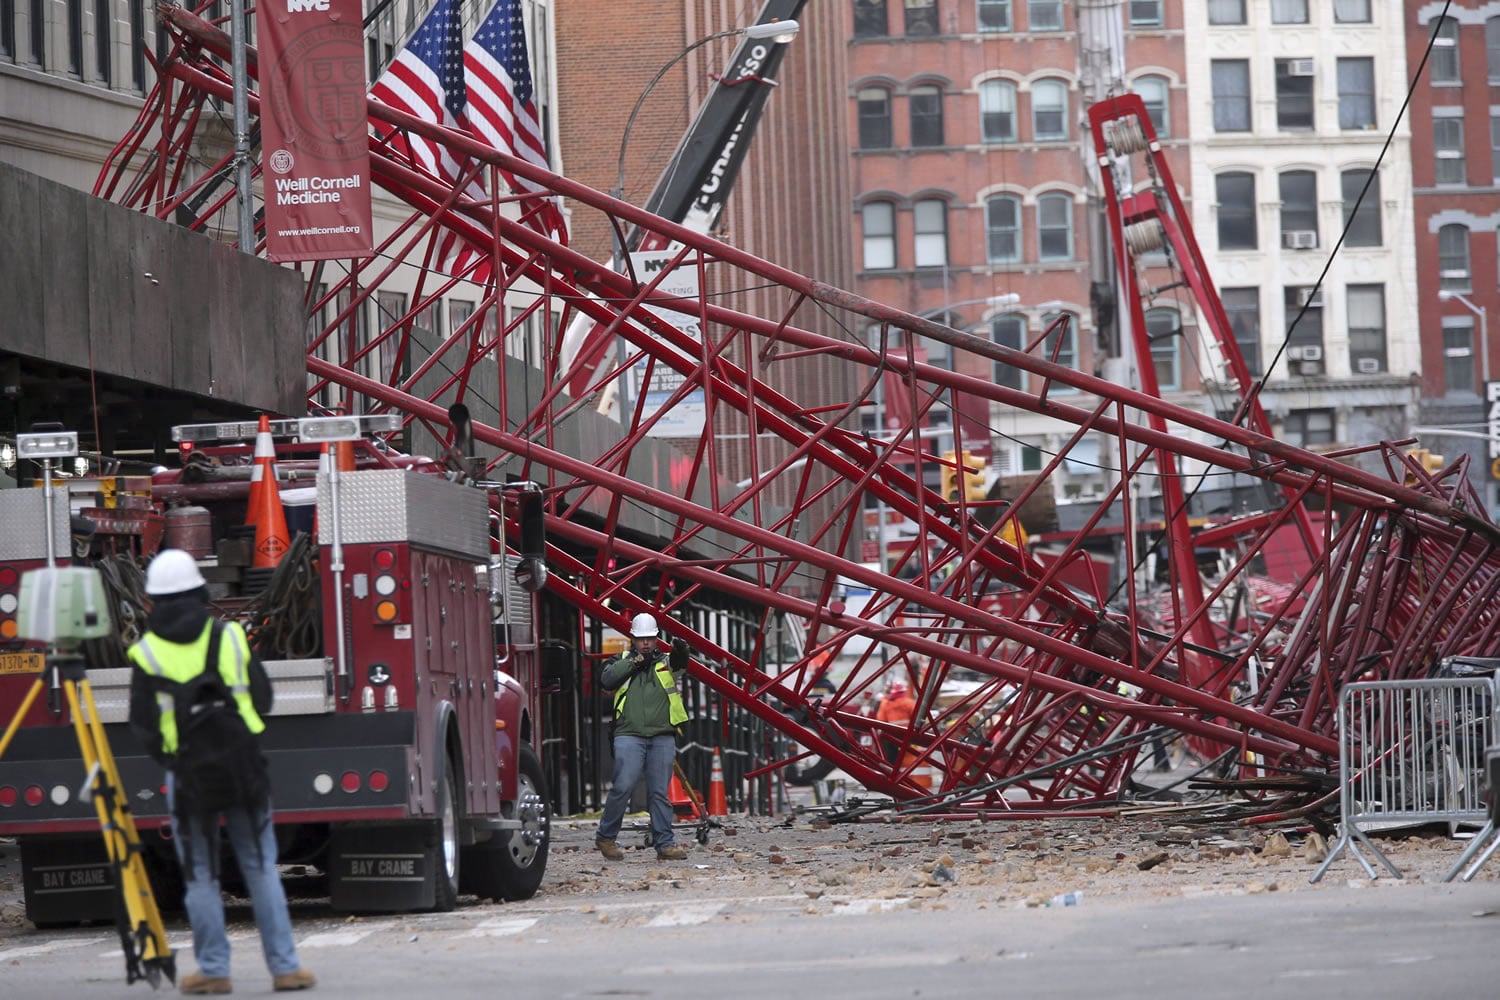 Firefighters and construction crews work Saturday on clearing the wreckage of a 565-foot crane that collapsed Friday morning in New York.